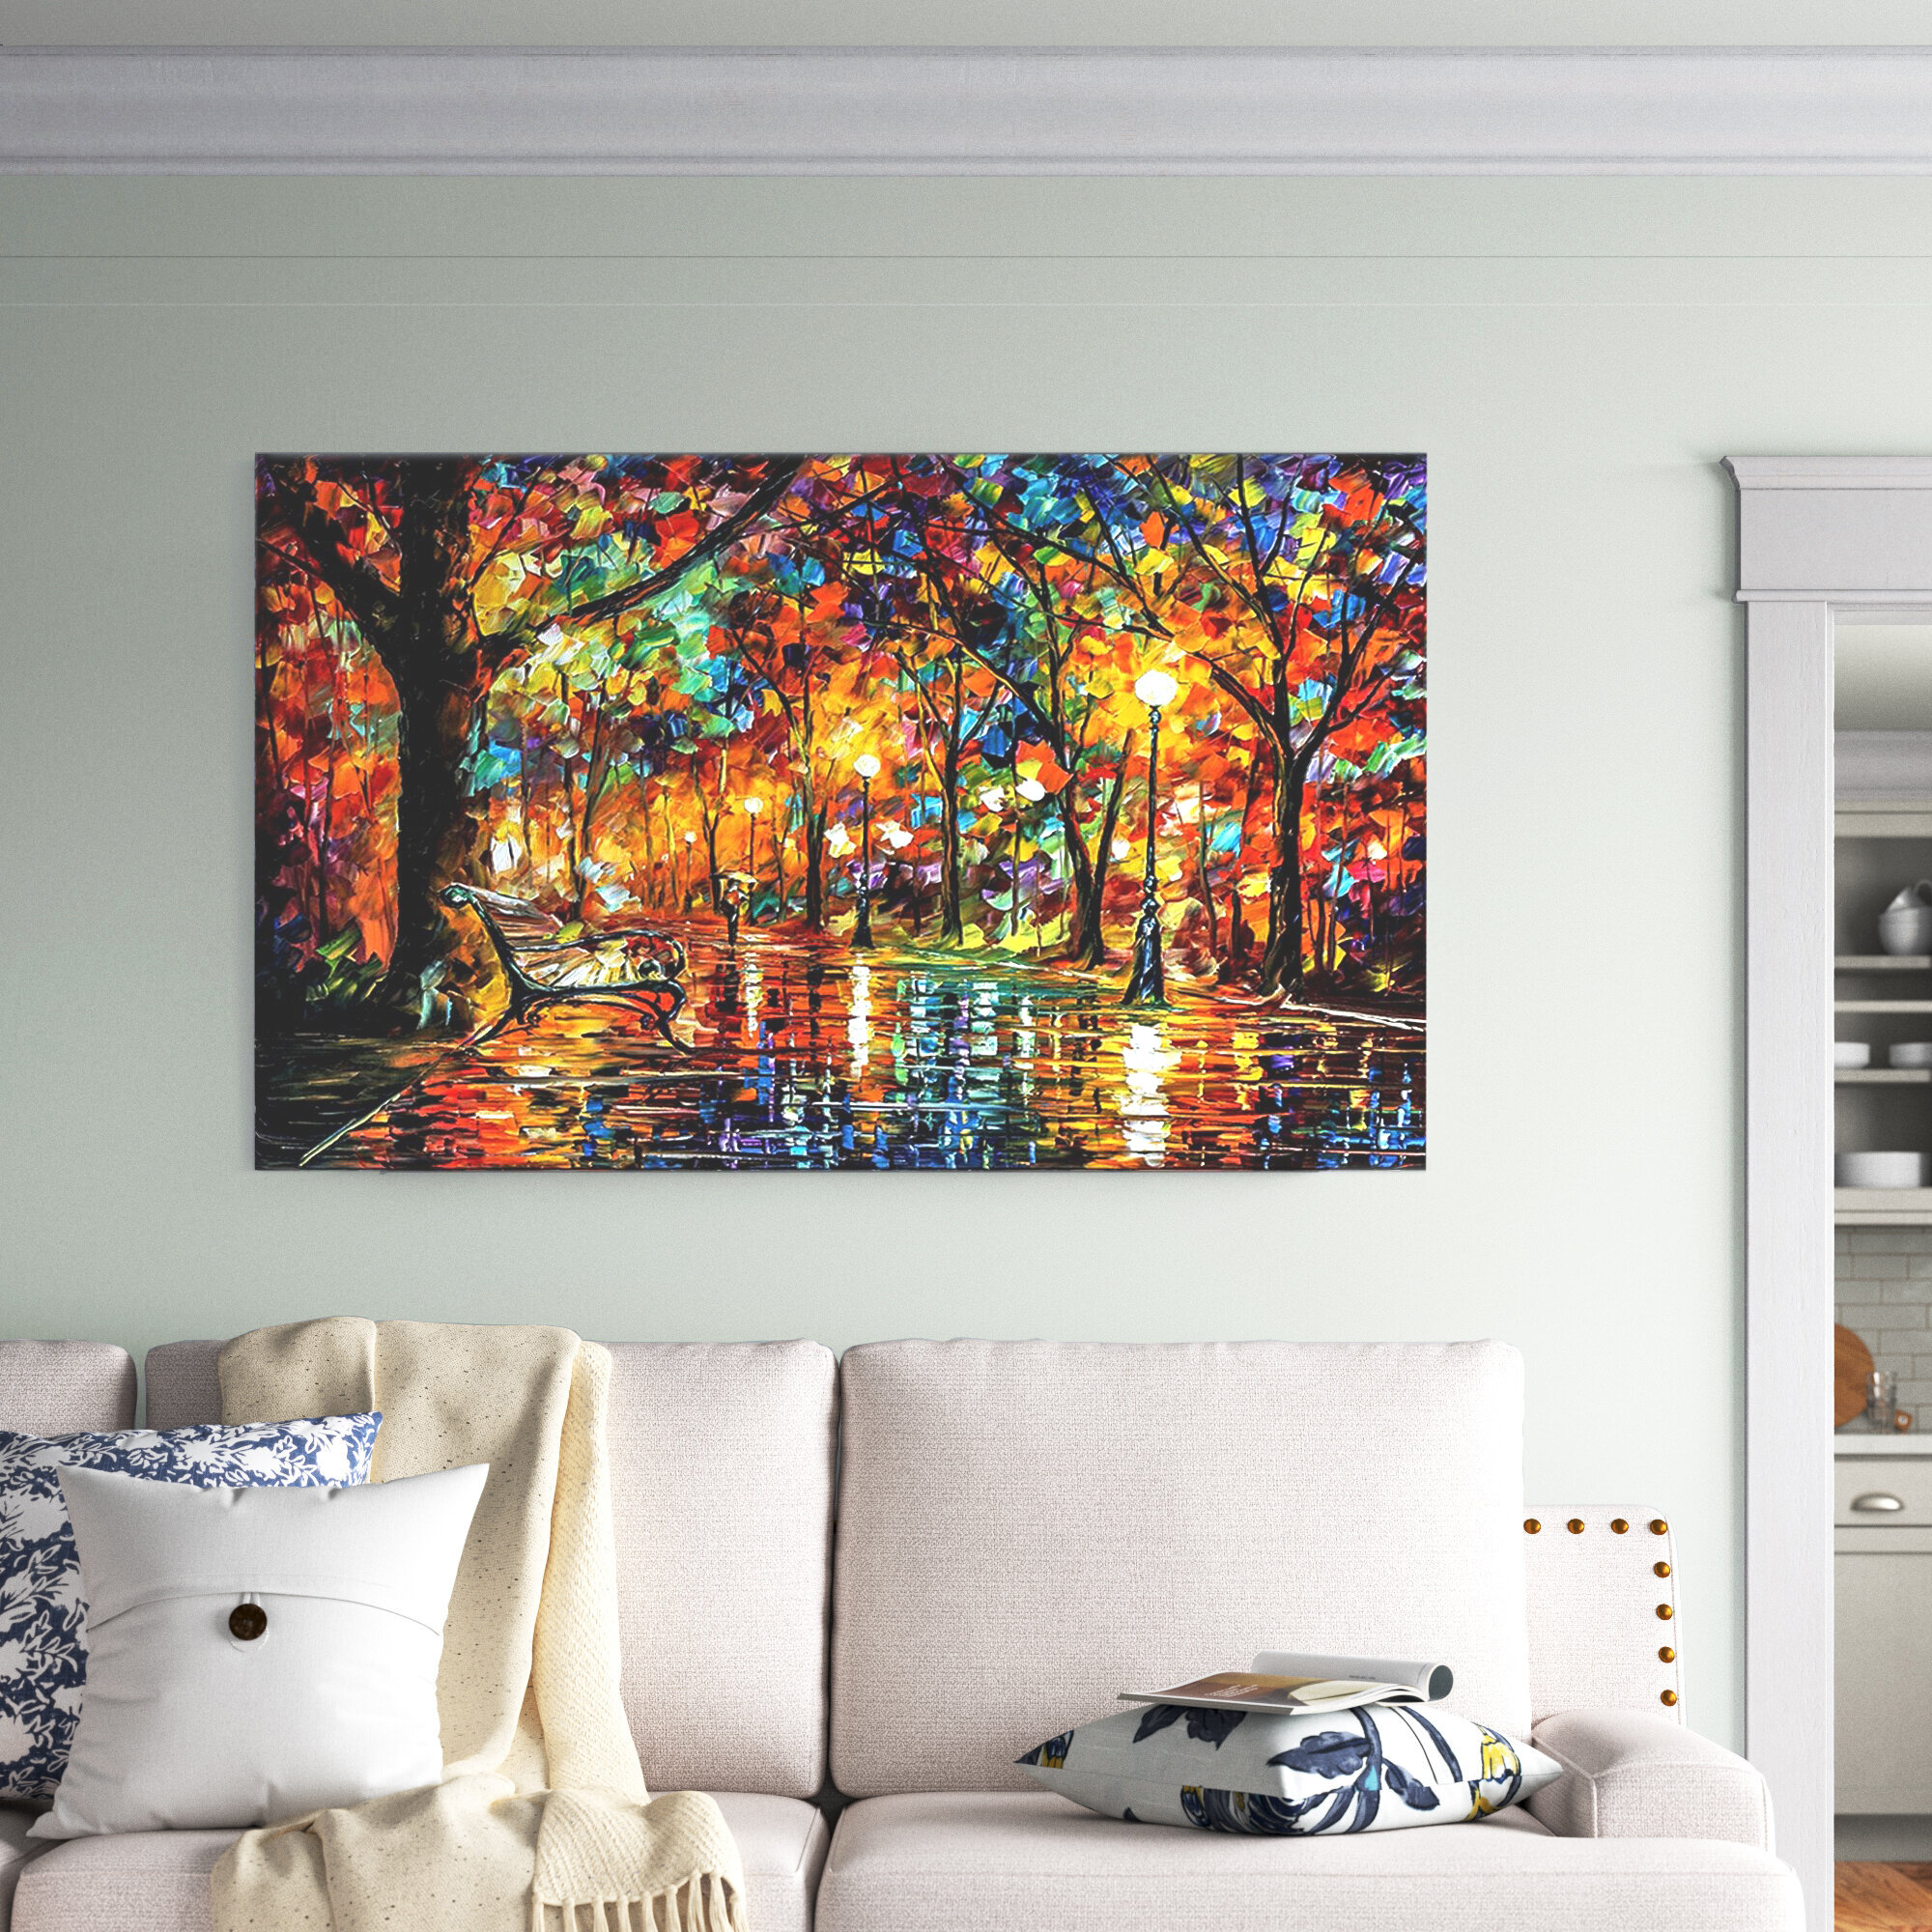 Colorful Tree Abstract Picture Canvas Prints Painting Home Wall Art Decor Framed 